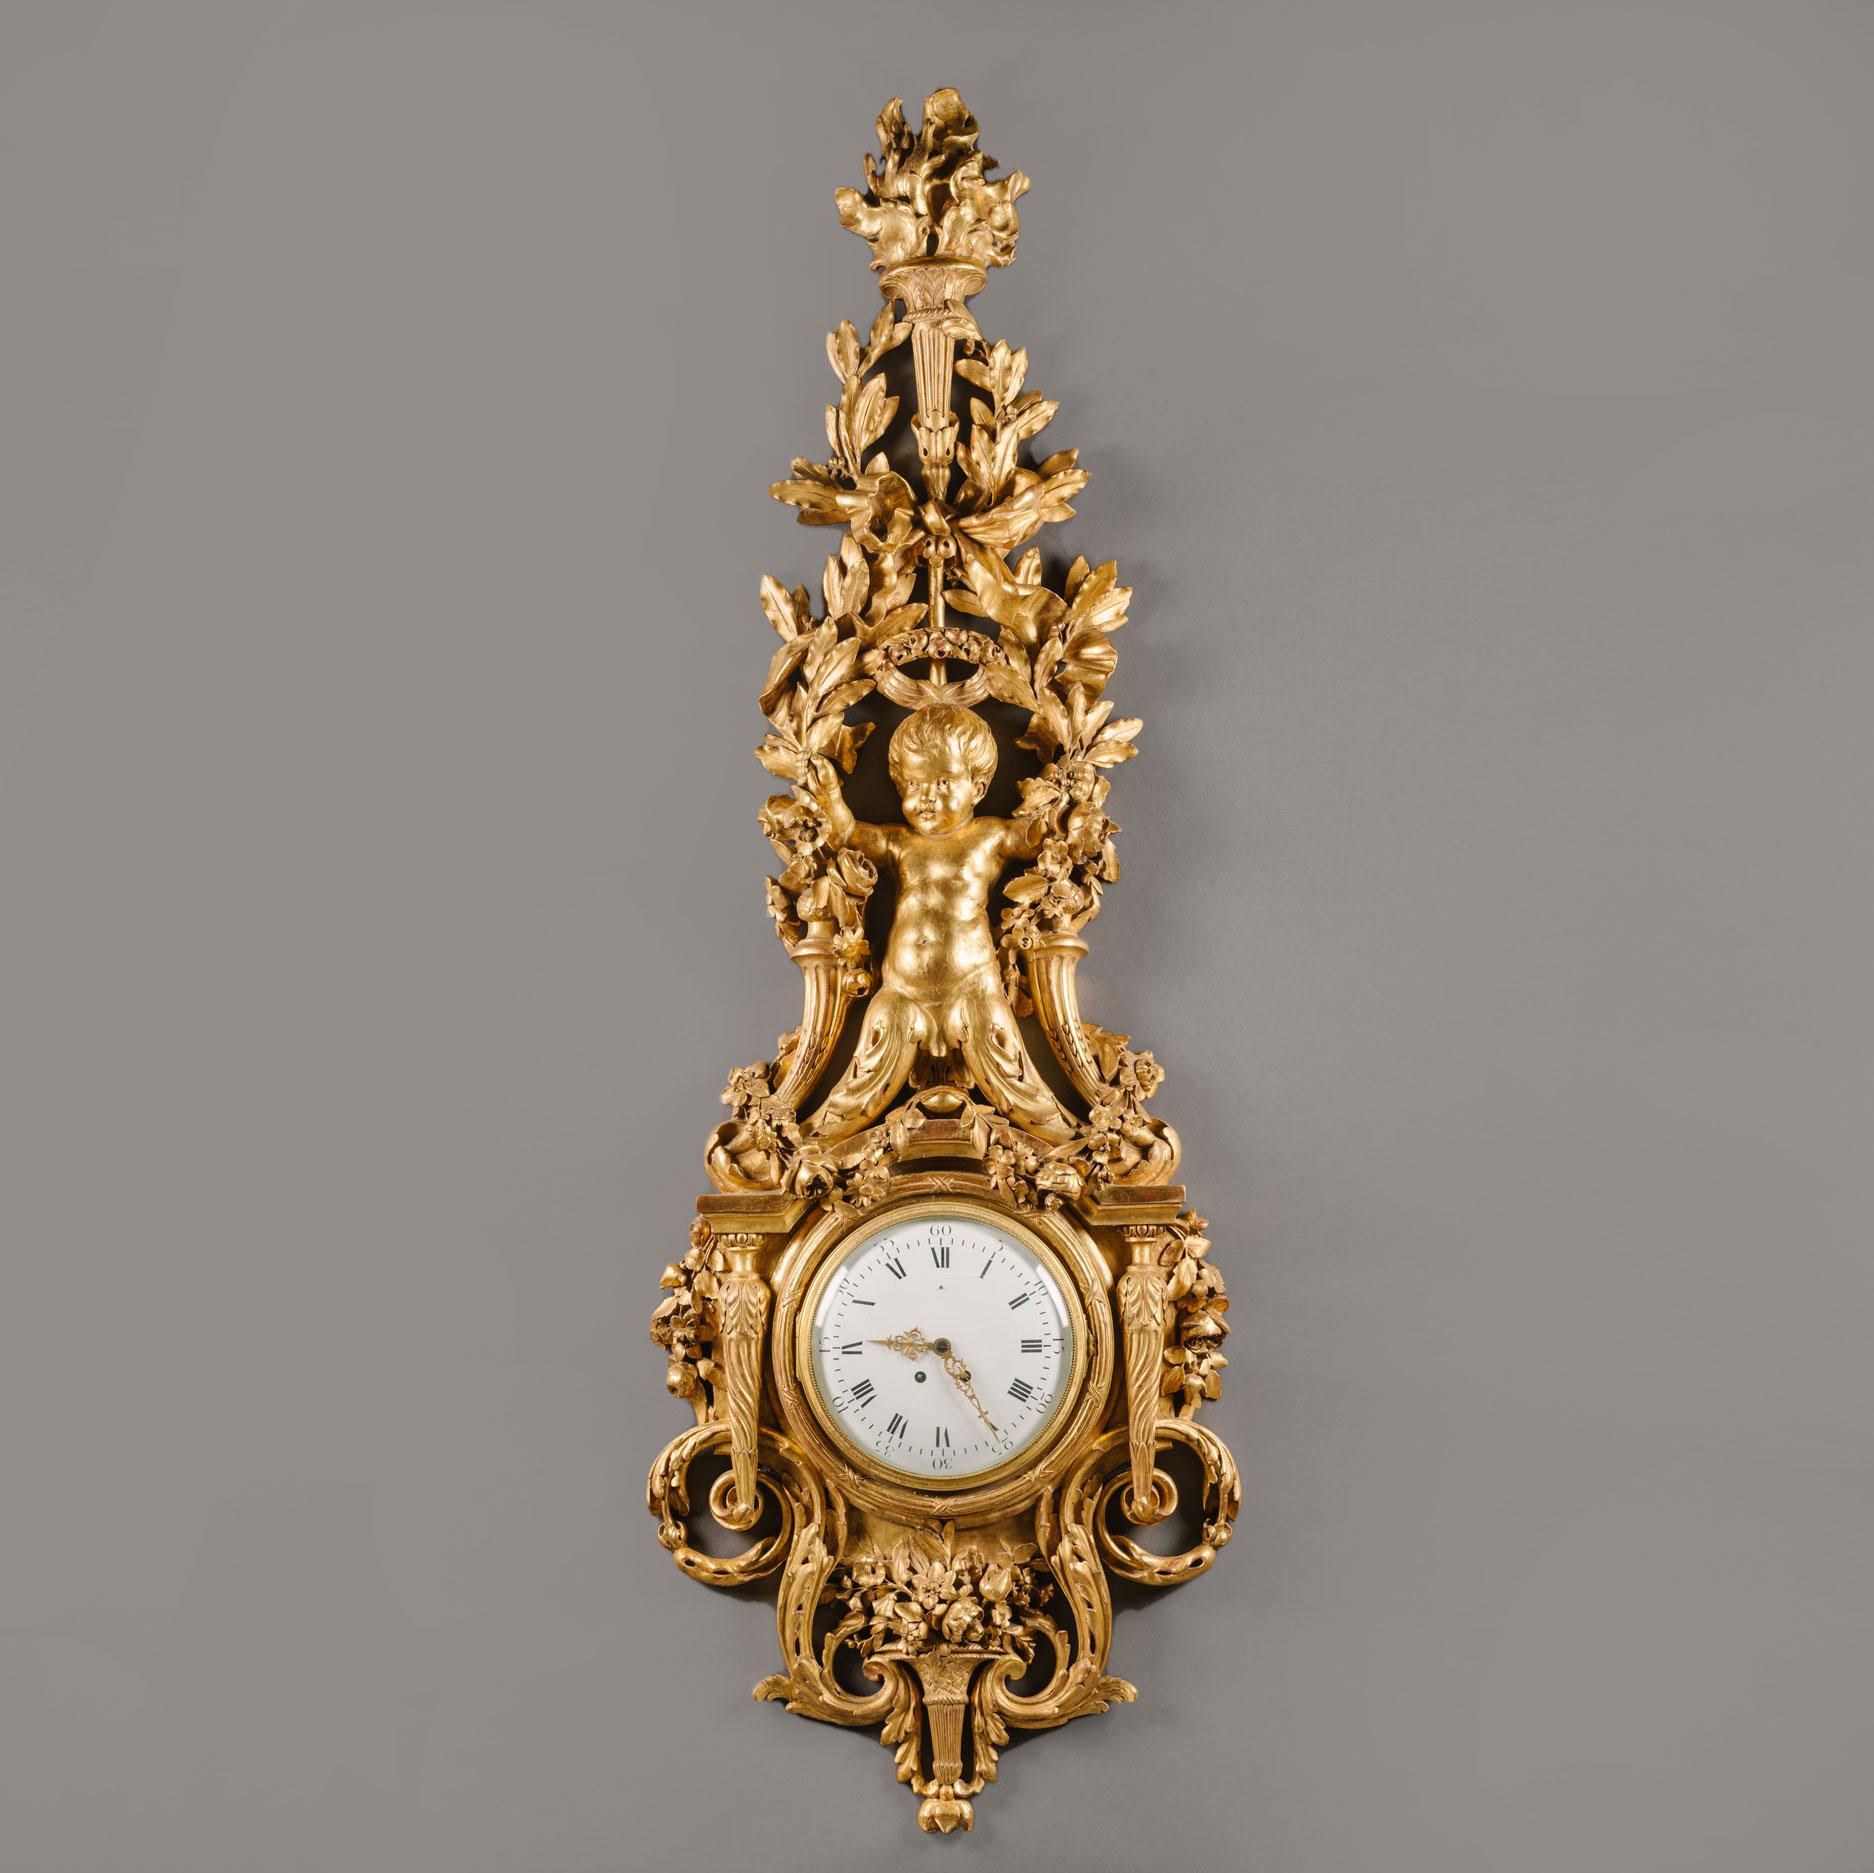 A large and important Louis XVI style carved giltwood clock and barometer set.

Each with circular enamel dials, the clock with Roman and Arabic numerals and pierced scrolled hands. The companion barometer with indications for the weather and